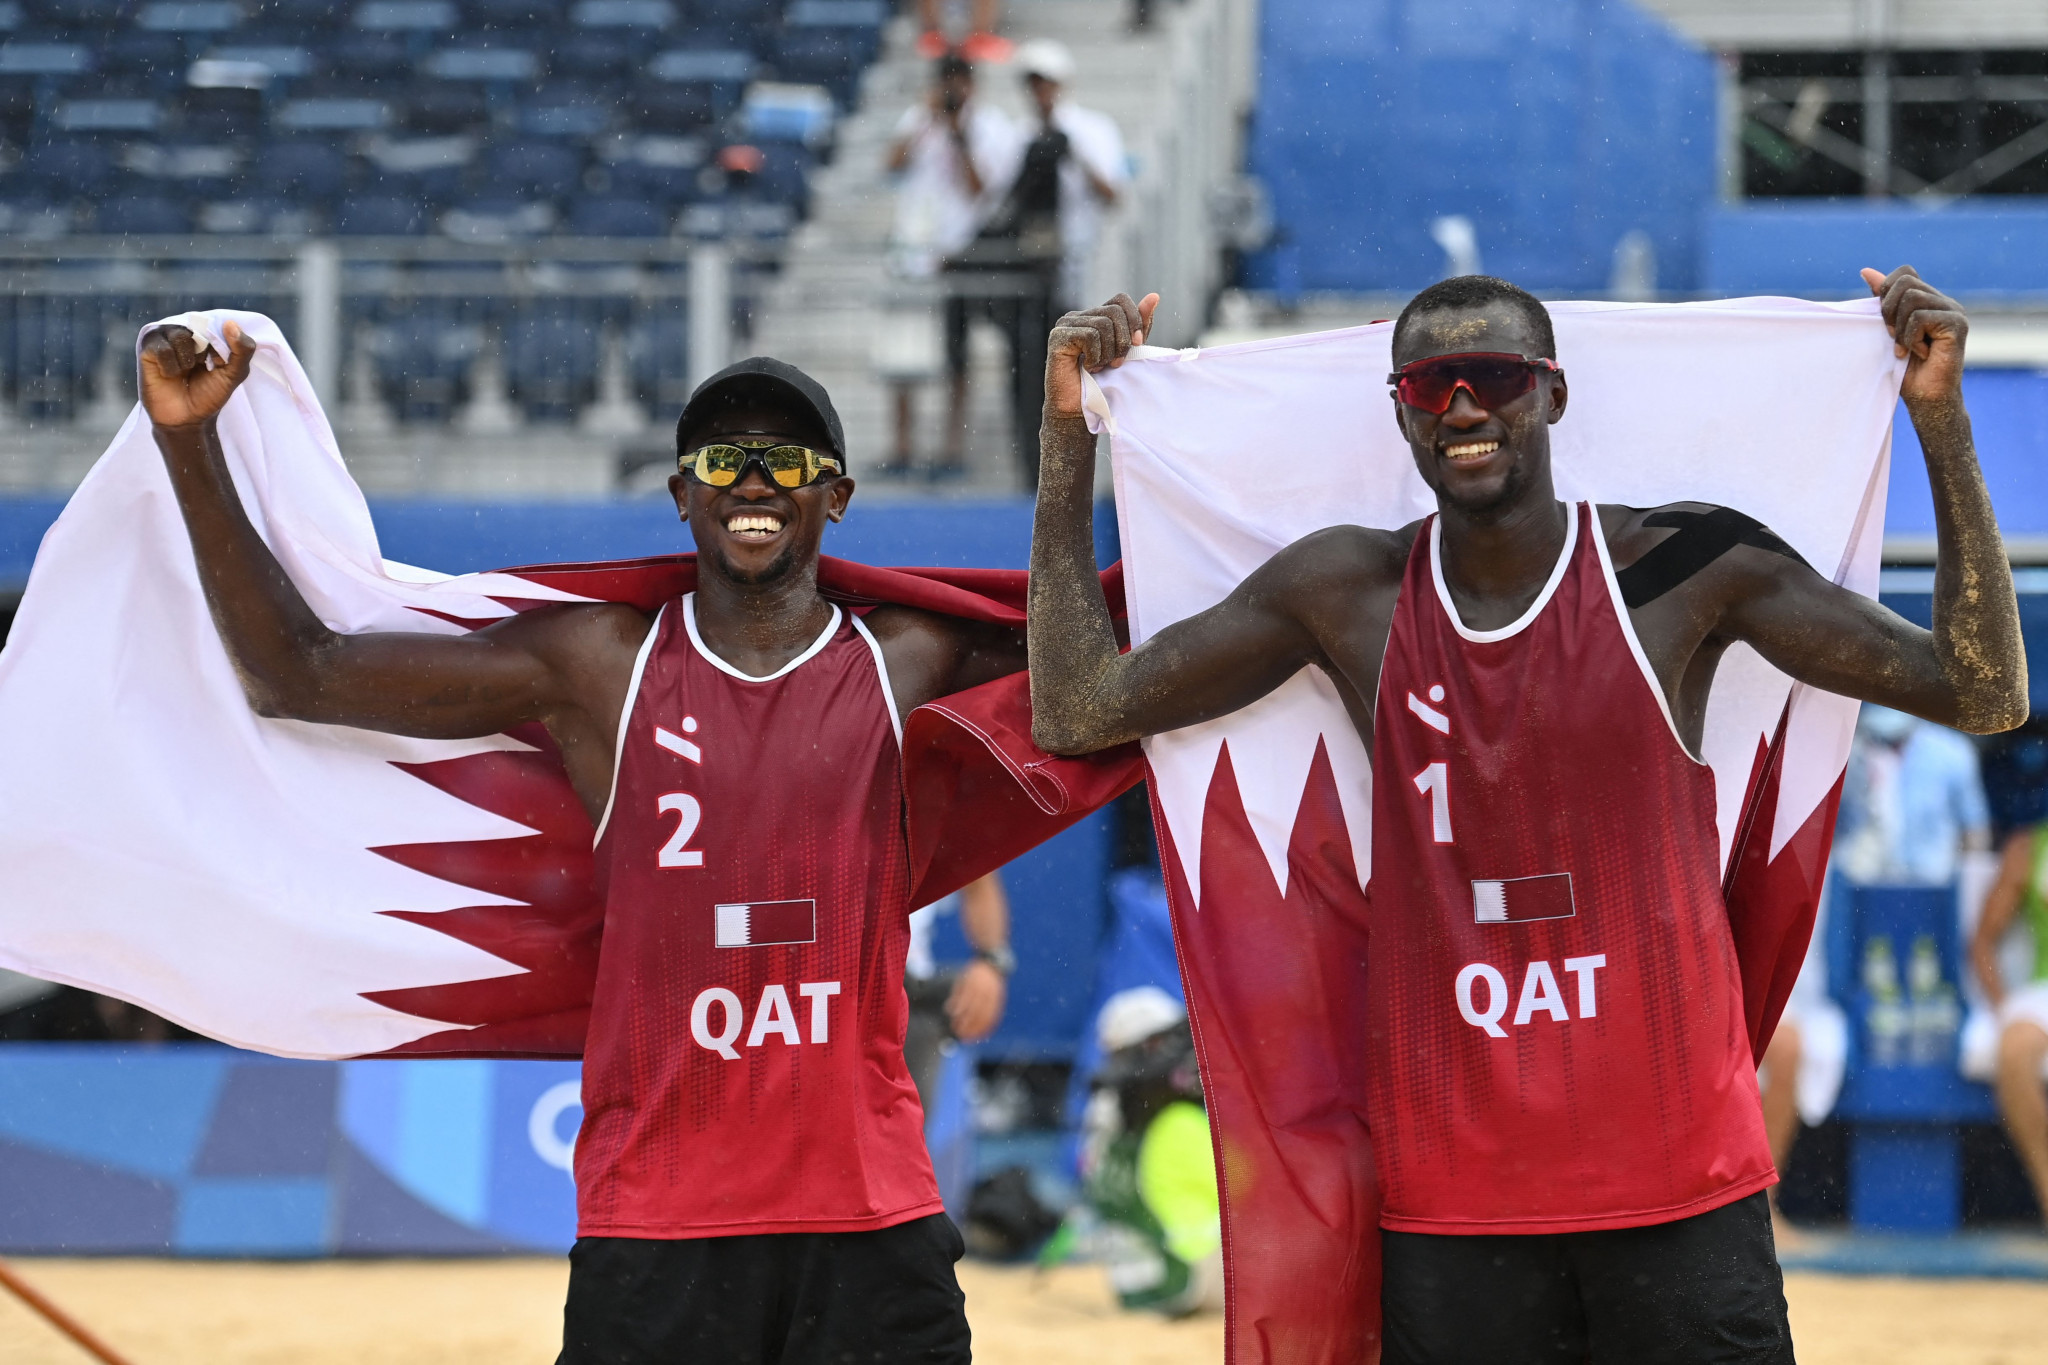 Qatar's beach volleyball stars eager to win home gold at Beach Pro Tour Challenge